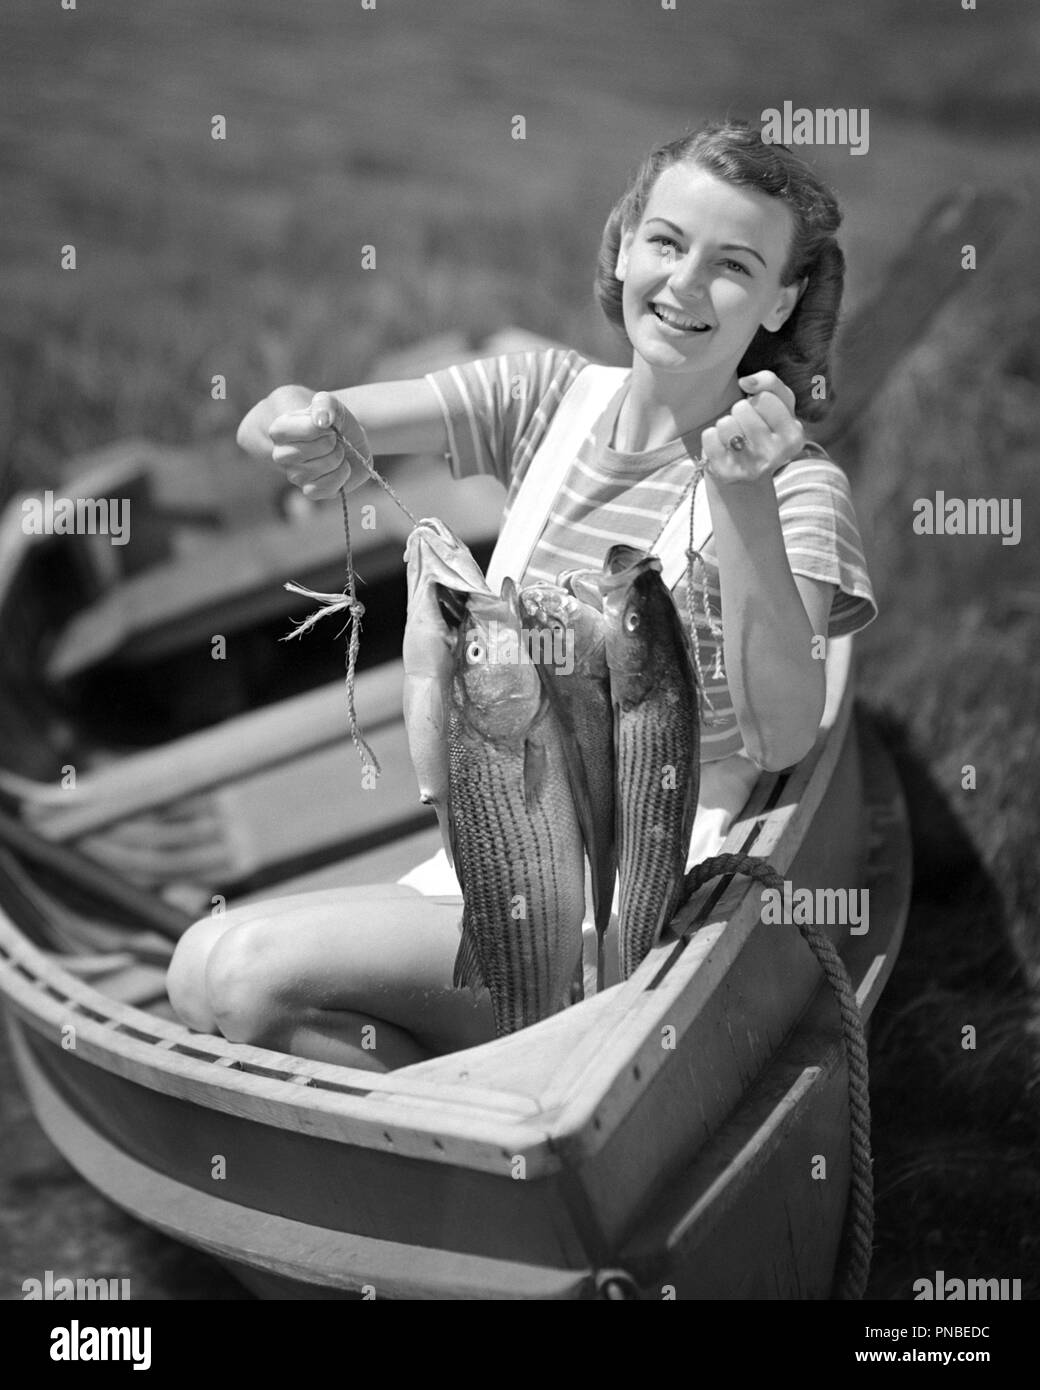 Women with fishing rod Black and White Stock Photos & Images - Alamy